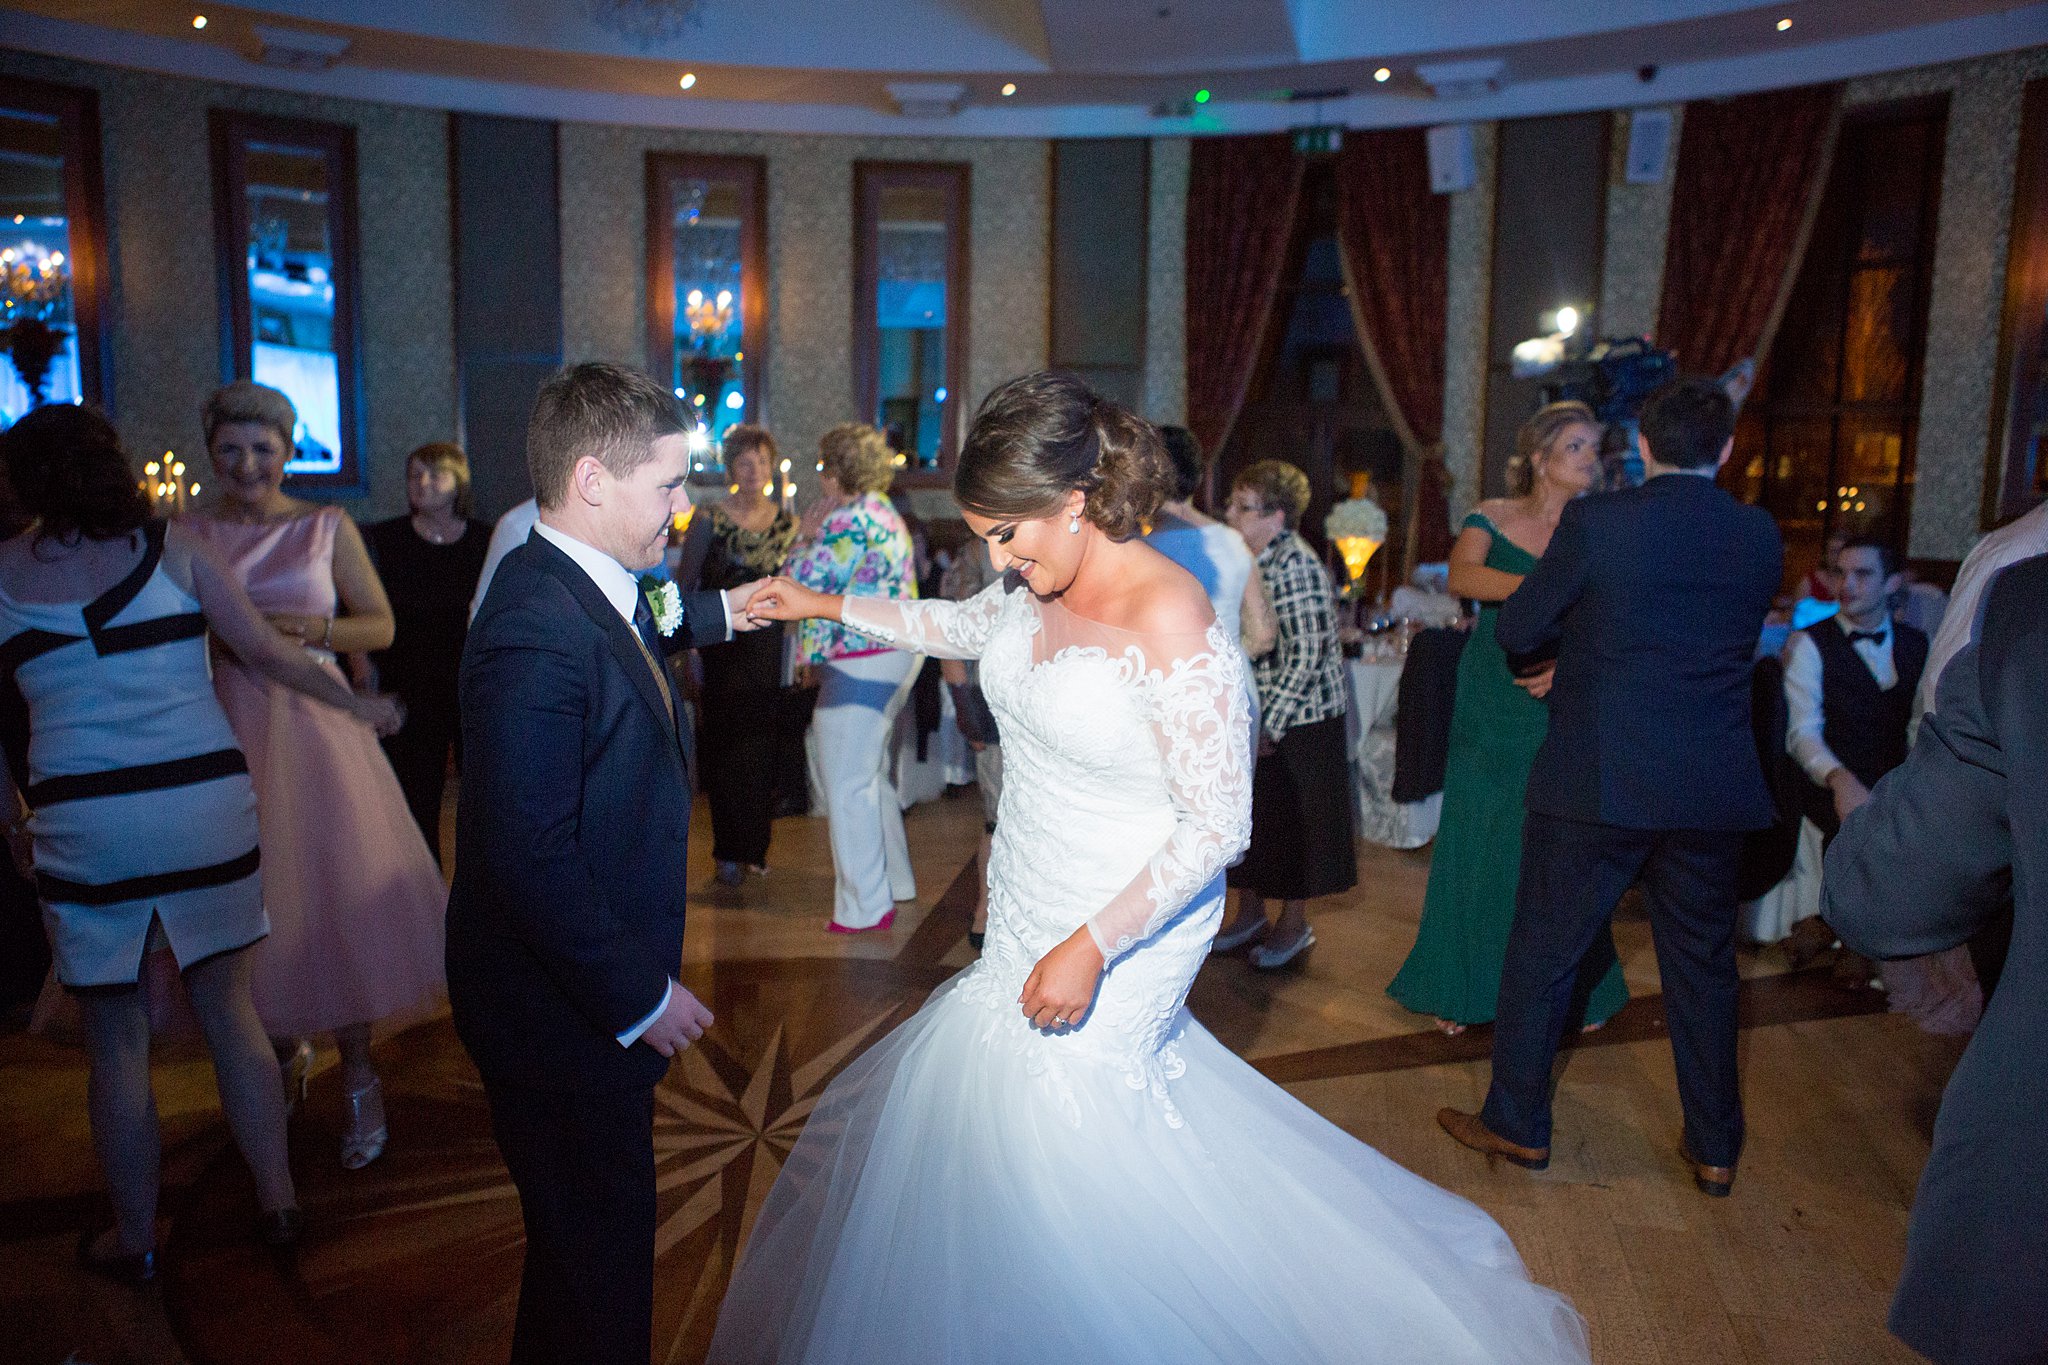 First dance songs